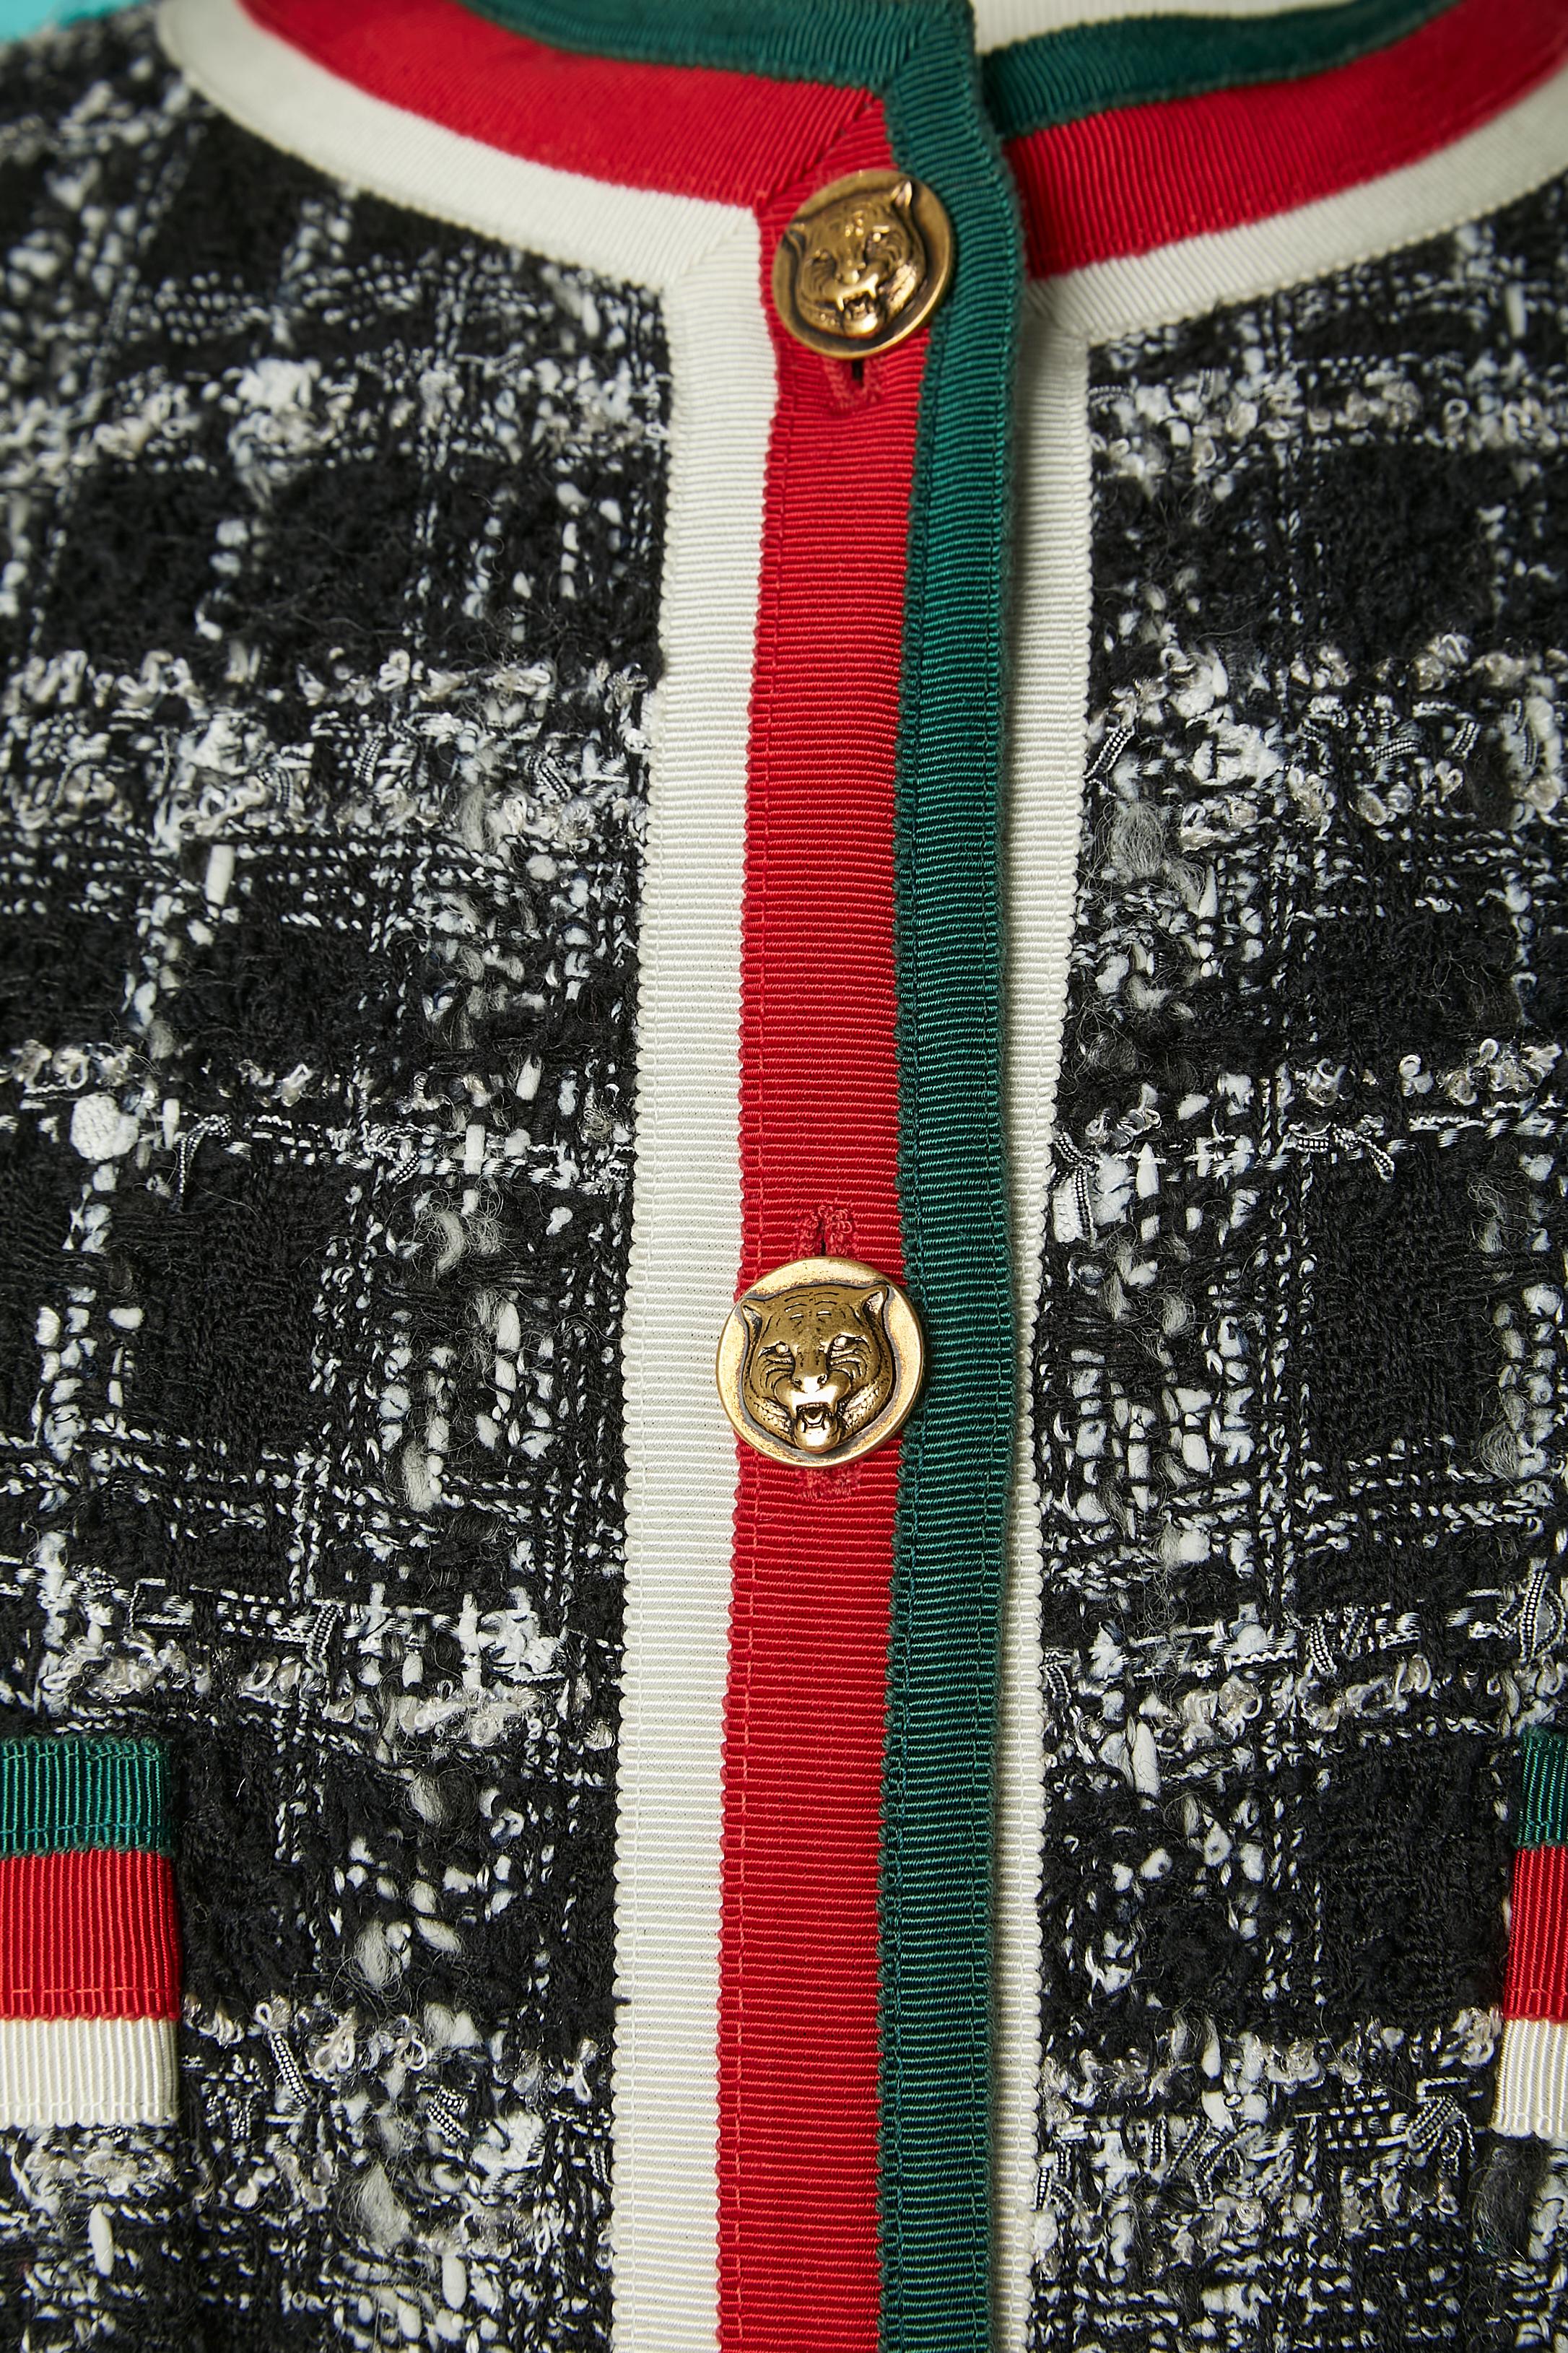 Tweed jacket with white, red & green trimming and gold metal jaguars button. 
Main fabric composition: 33% wool, 28% polyester, 15% polyamide, 11% cotton, 9% acrylic, 4% rayon. 
Trimming: 50% cotton, 50% rayon. Lining: 73% Cupro, 27% silk.
SIZE 38 /